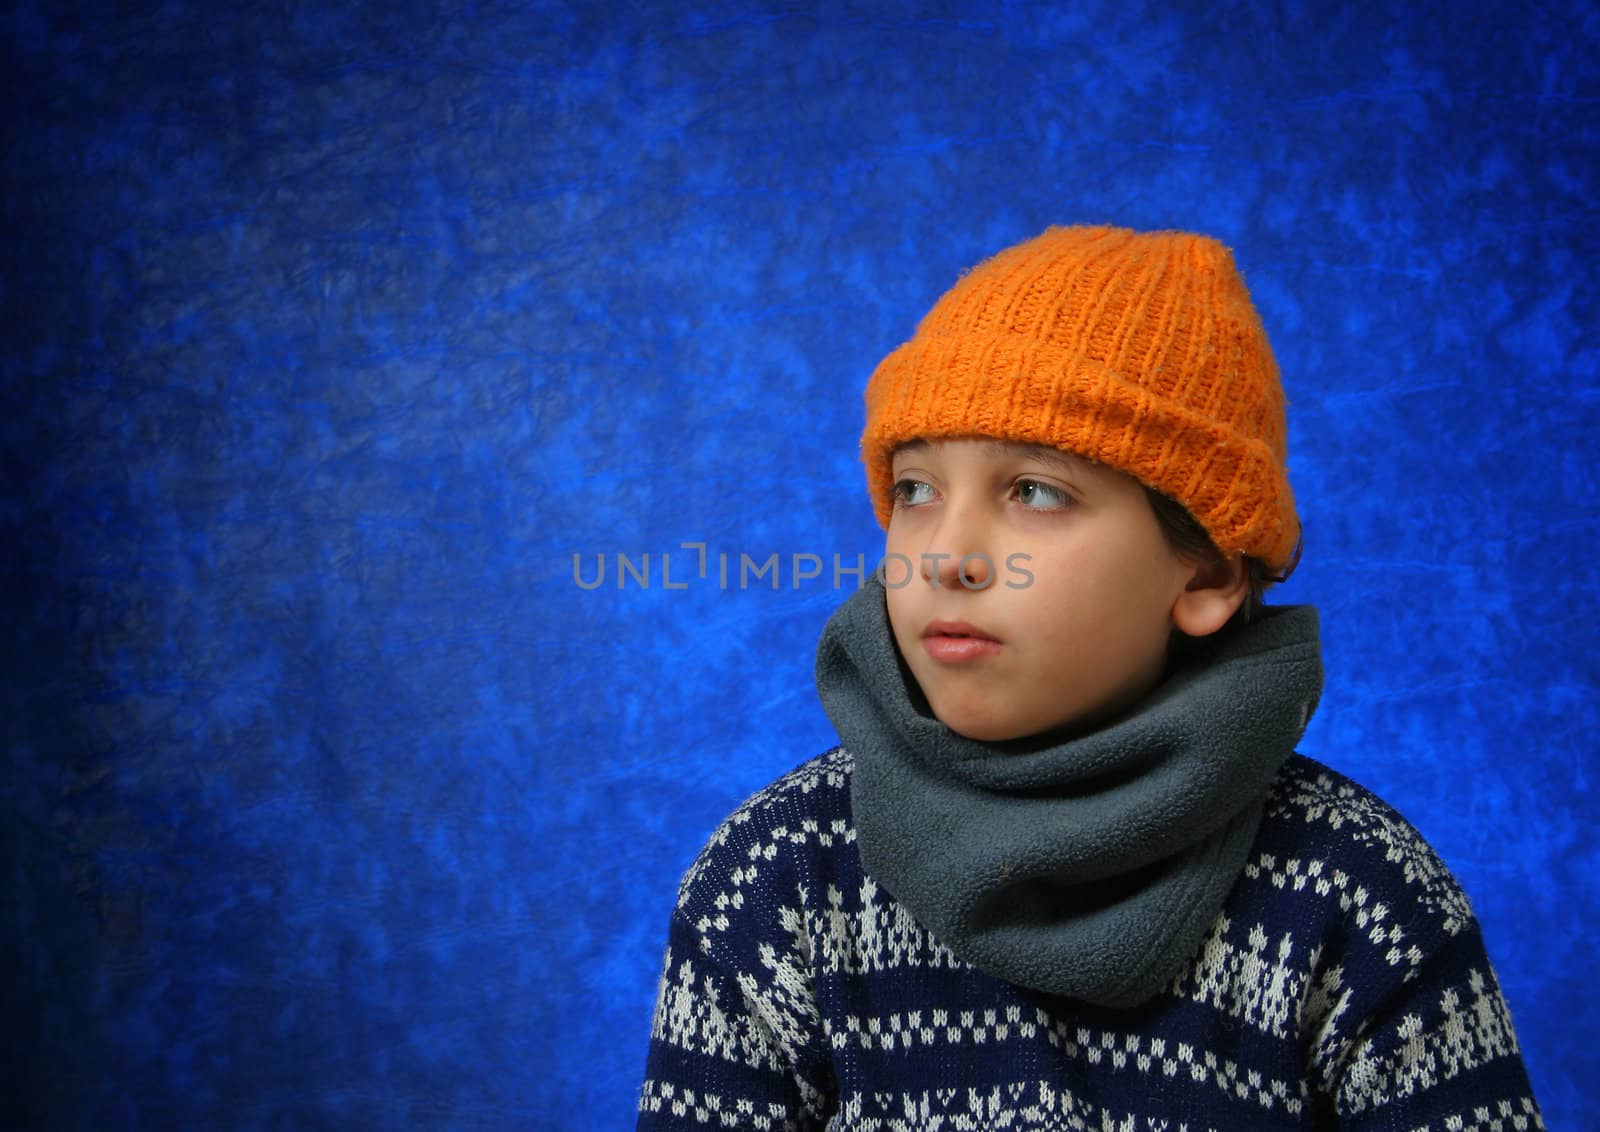 Boy portrait in winter outfit. Look at my gallery for more winter images